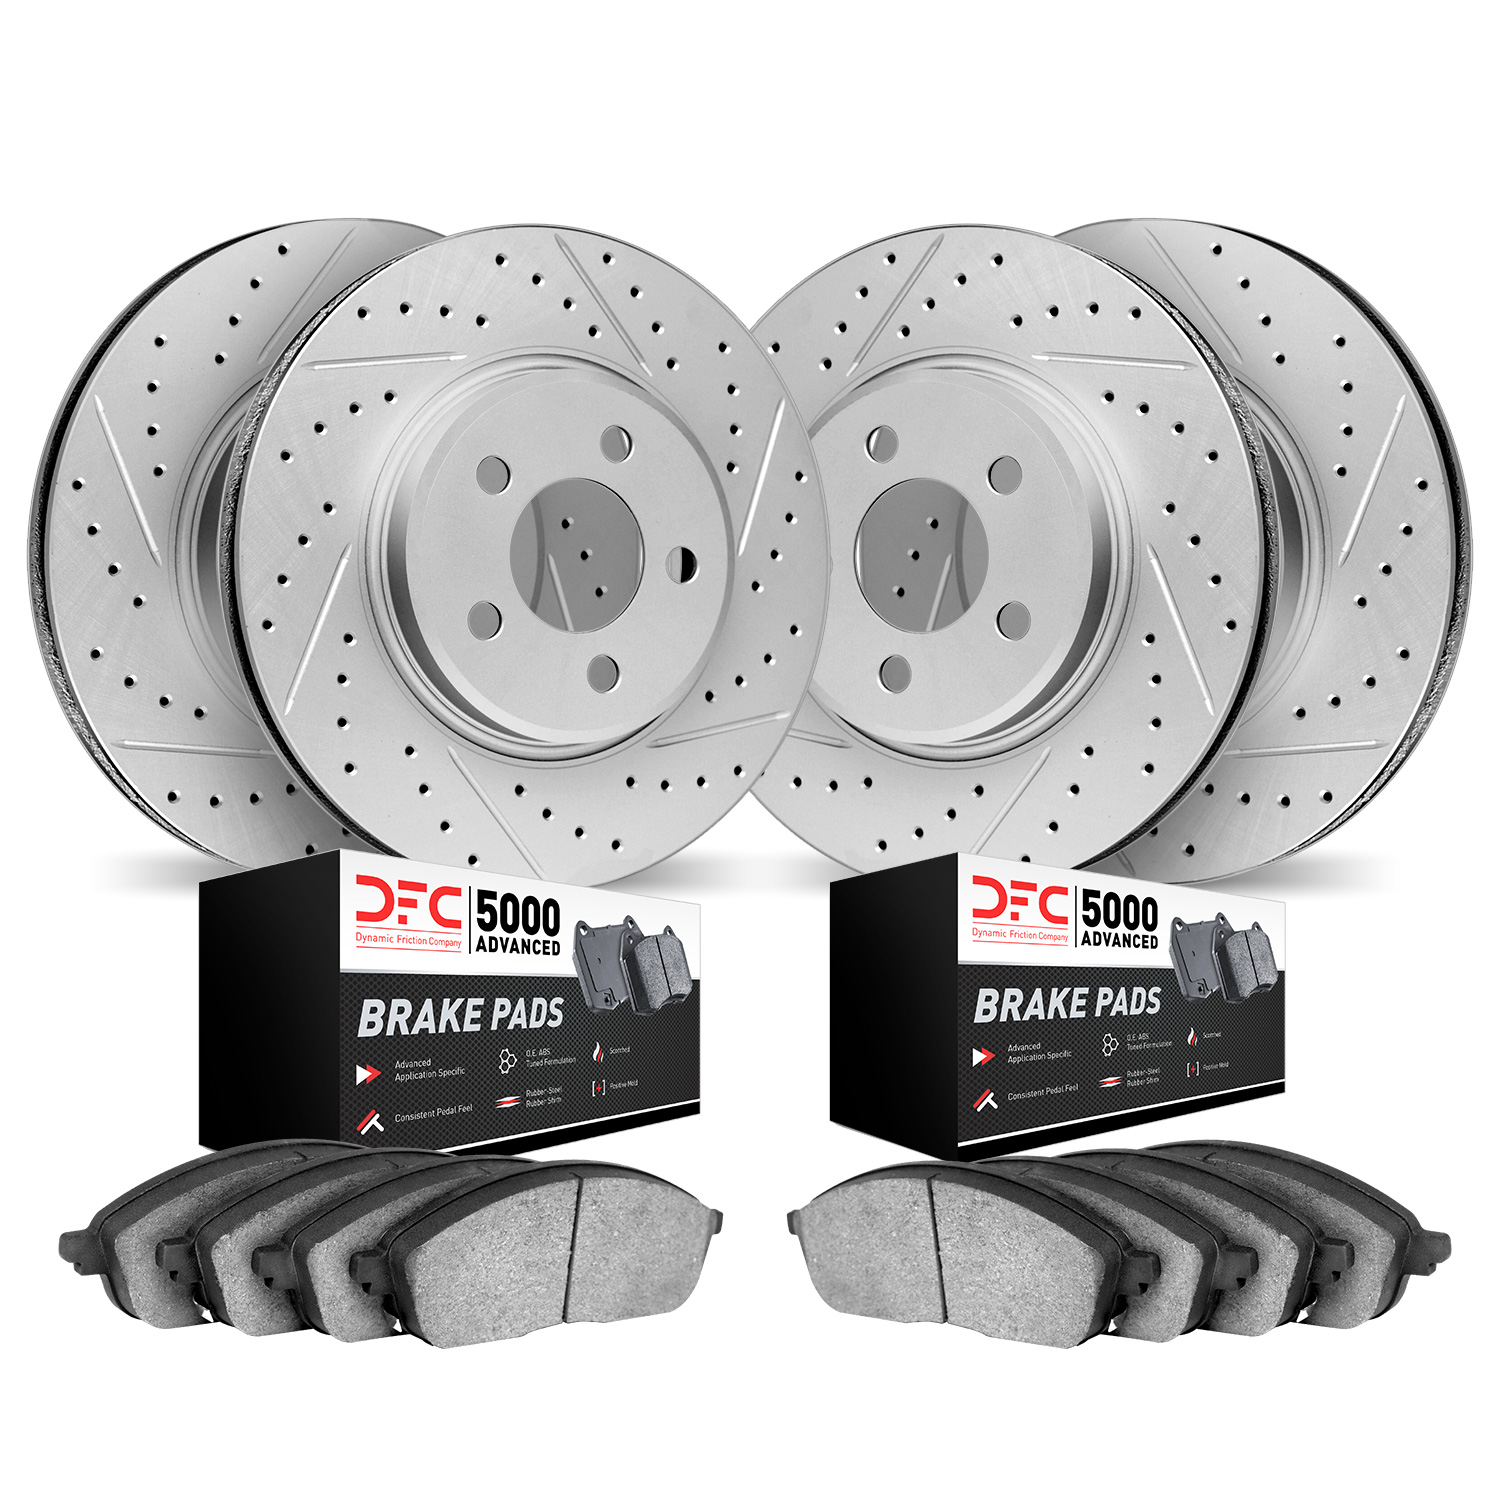 2504-31065 Geoperformance Drilled/Slotted Rotors w/5000 Advanced Brake Pads Kit, 2017-2020 BMW, Position: Front and Rear